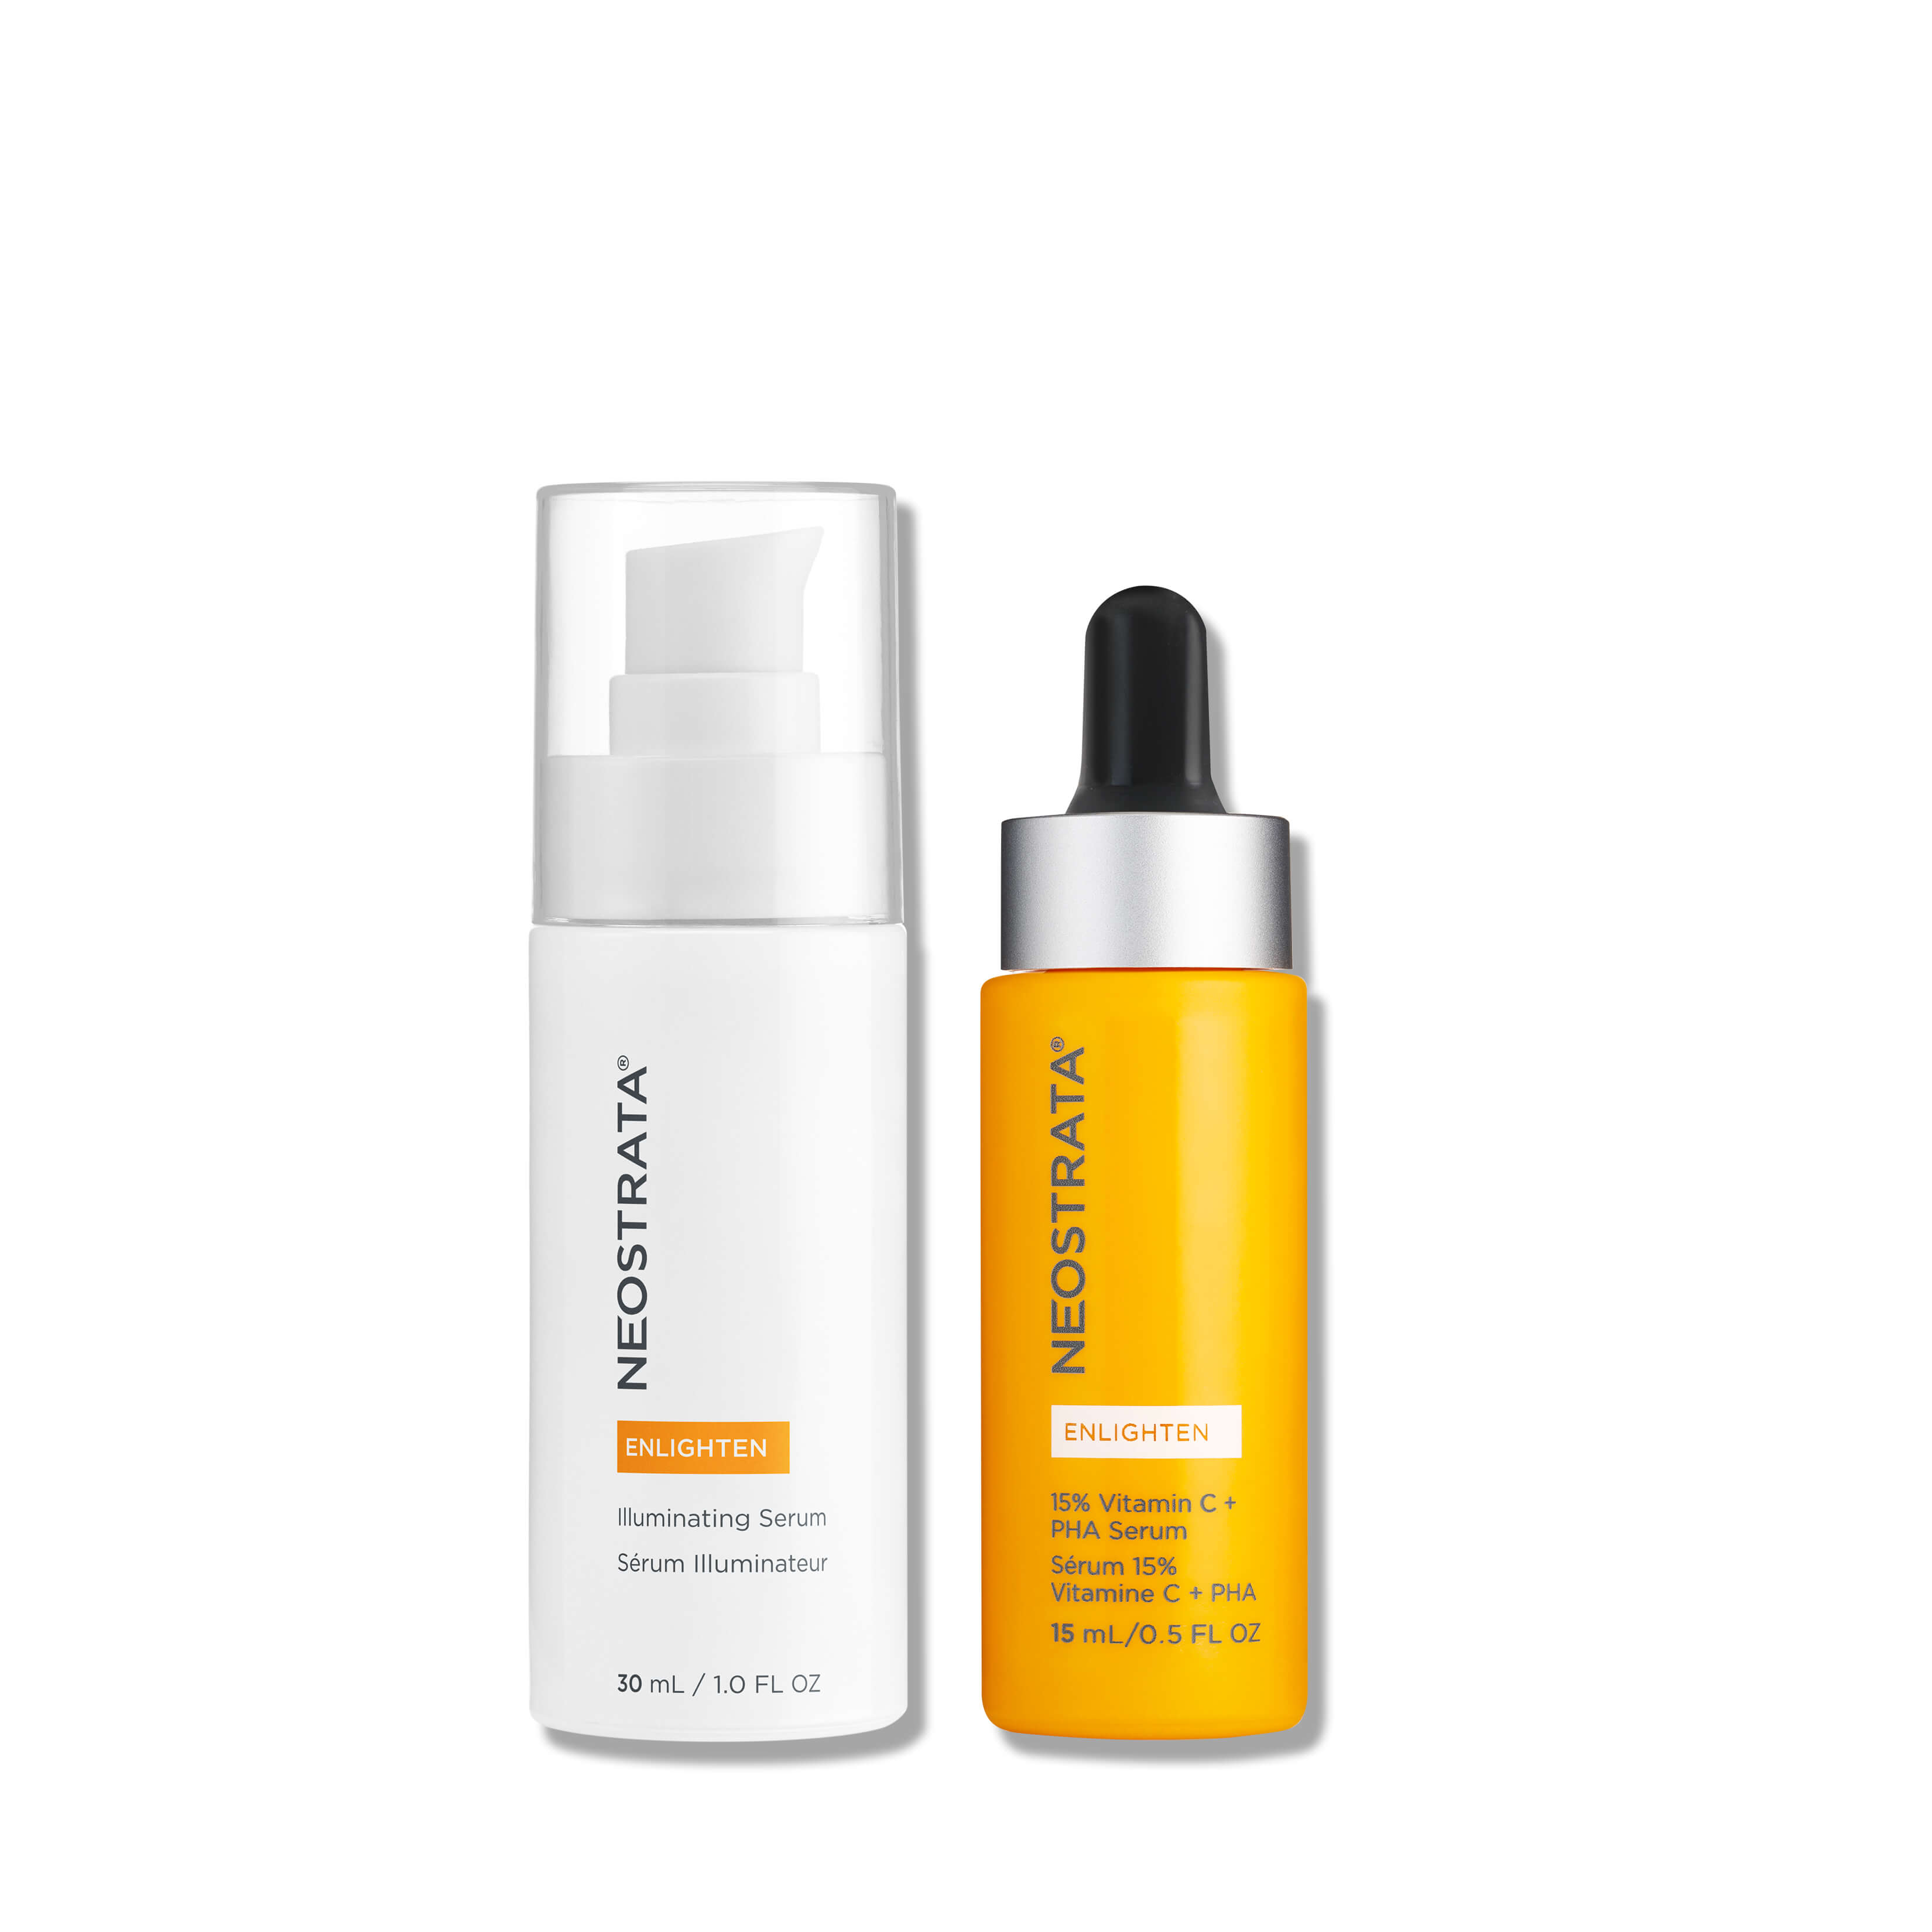 NeoStrata Enlighten Day & Night Serum Duo | Let Your Skin Light The Way This Season With This Duo Of Potent Serums From Our Enlighten Collection | Ant